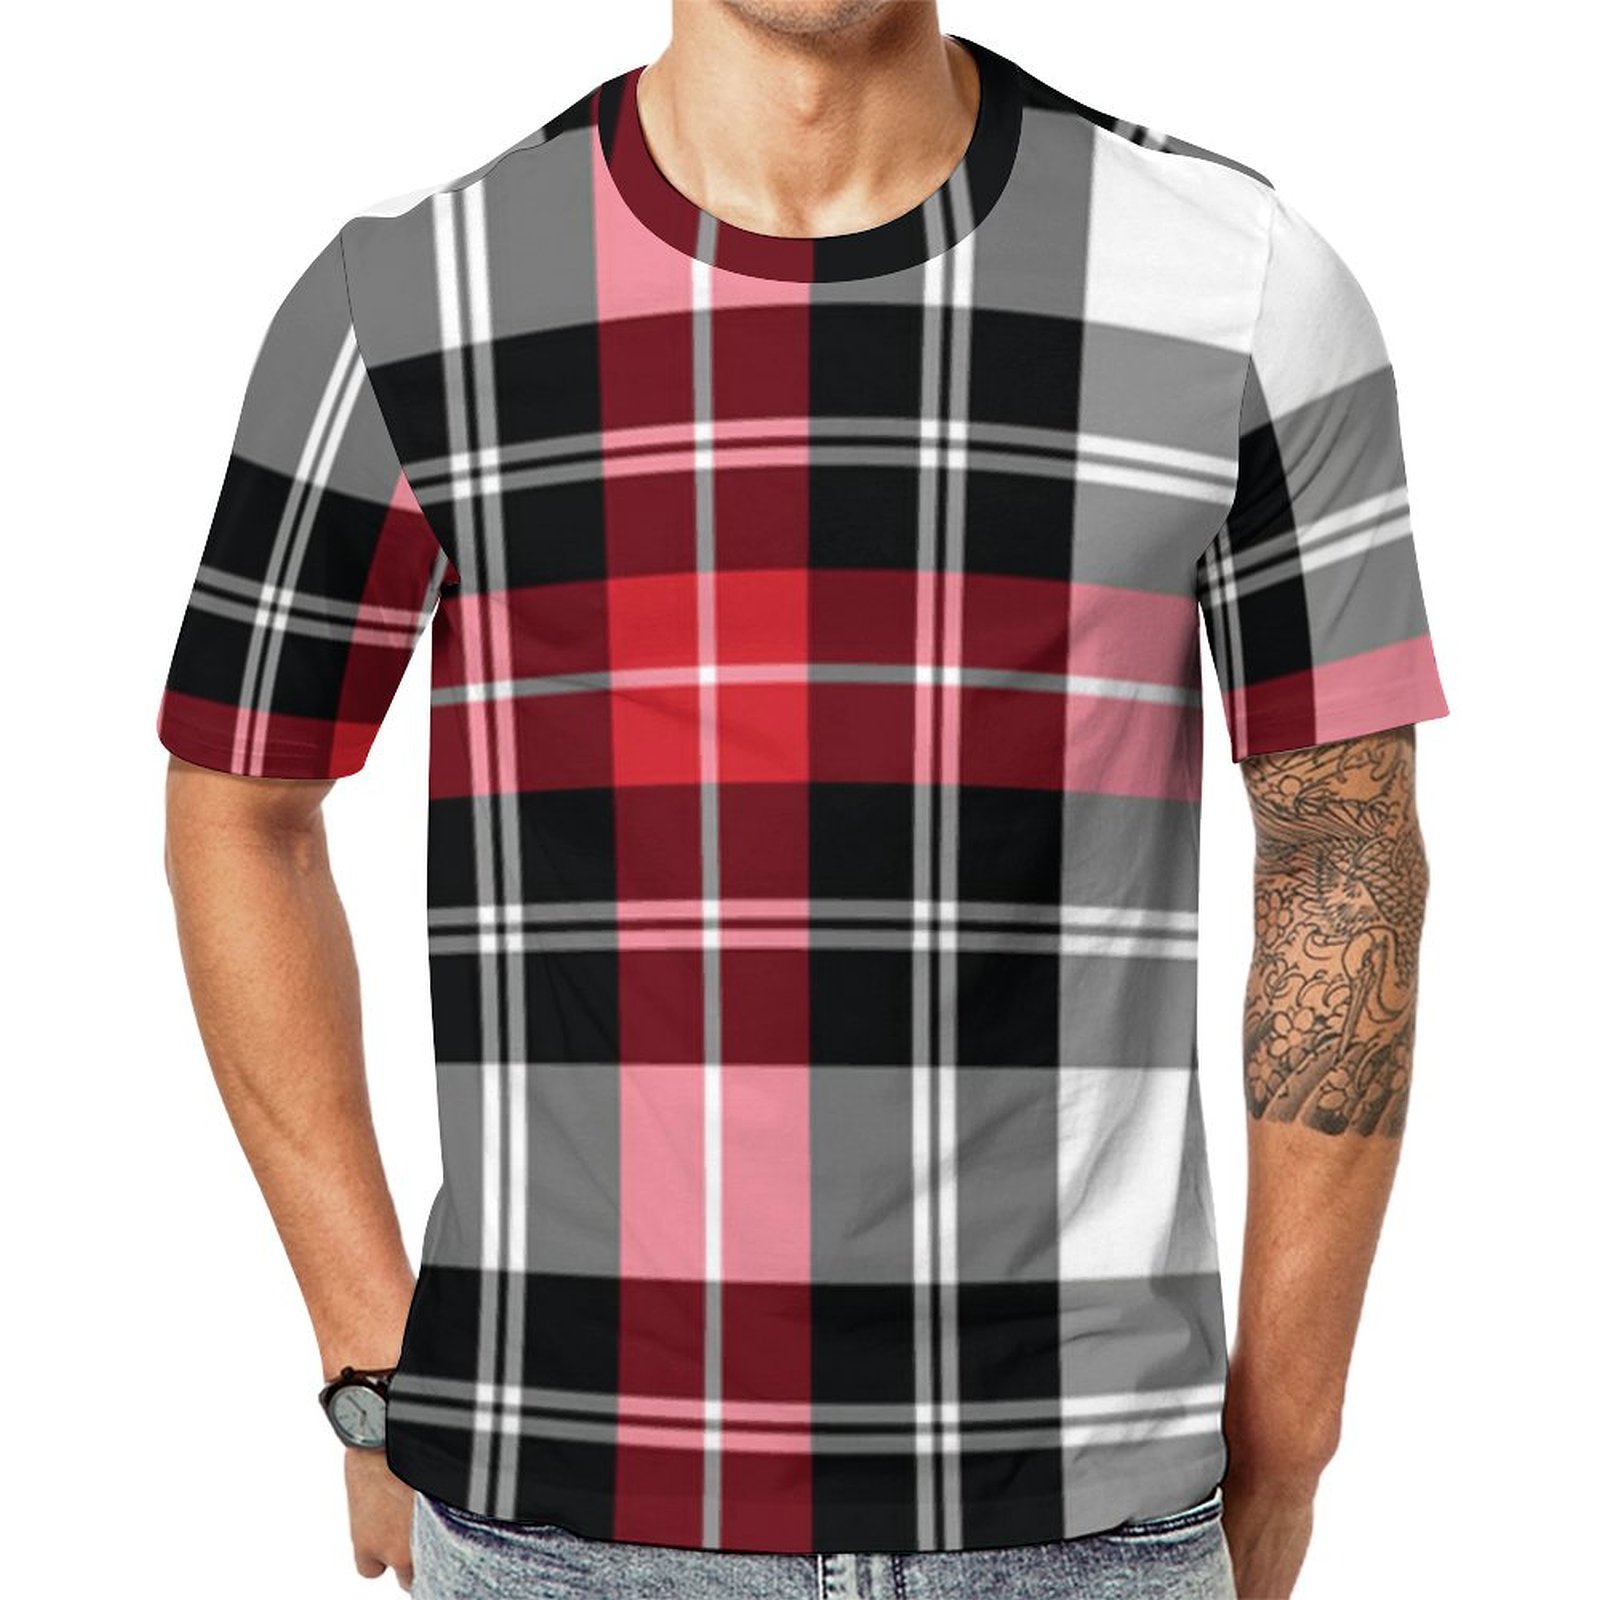 Red White Black Plaid Short Sleeve Print Unisex Tshirt Summer Casual Tees for Men and Women Coolcoshirts